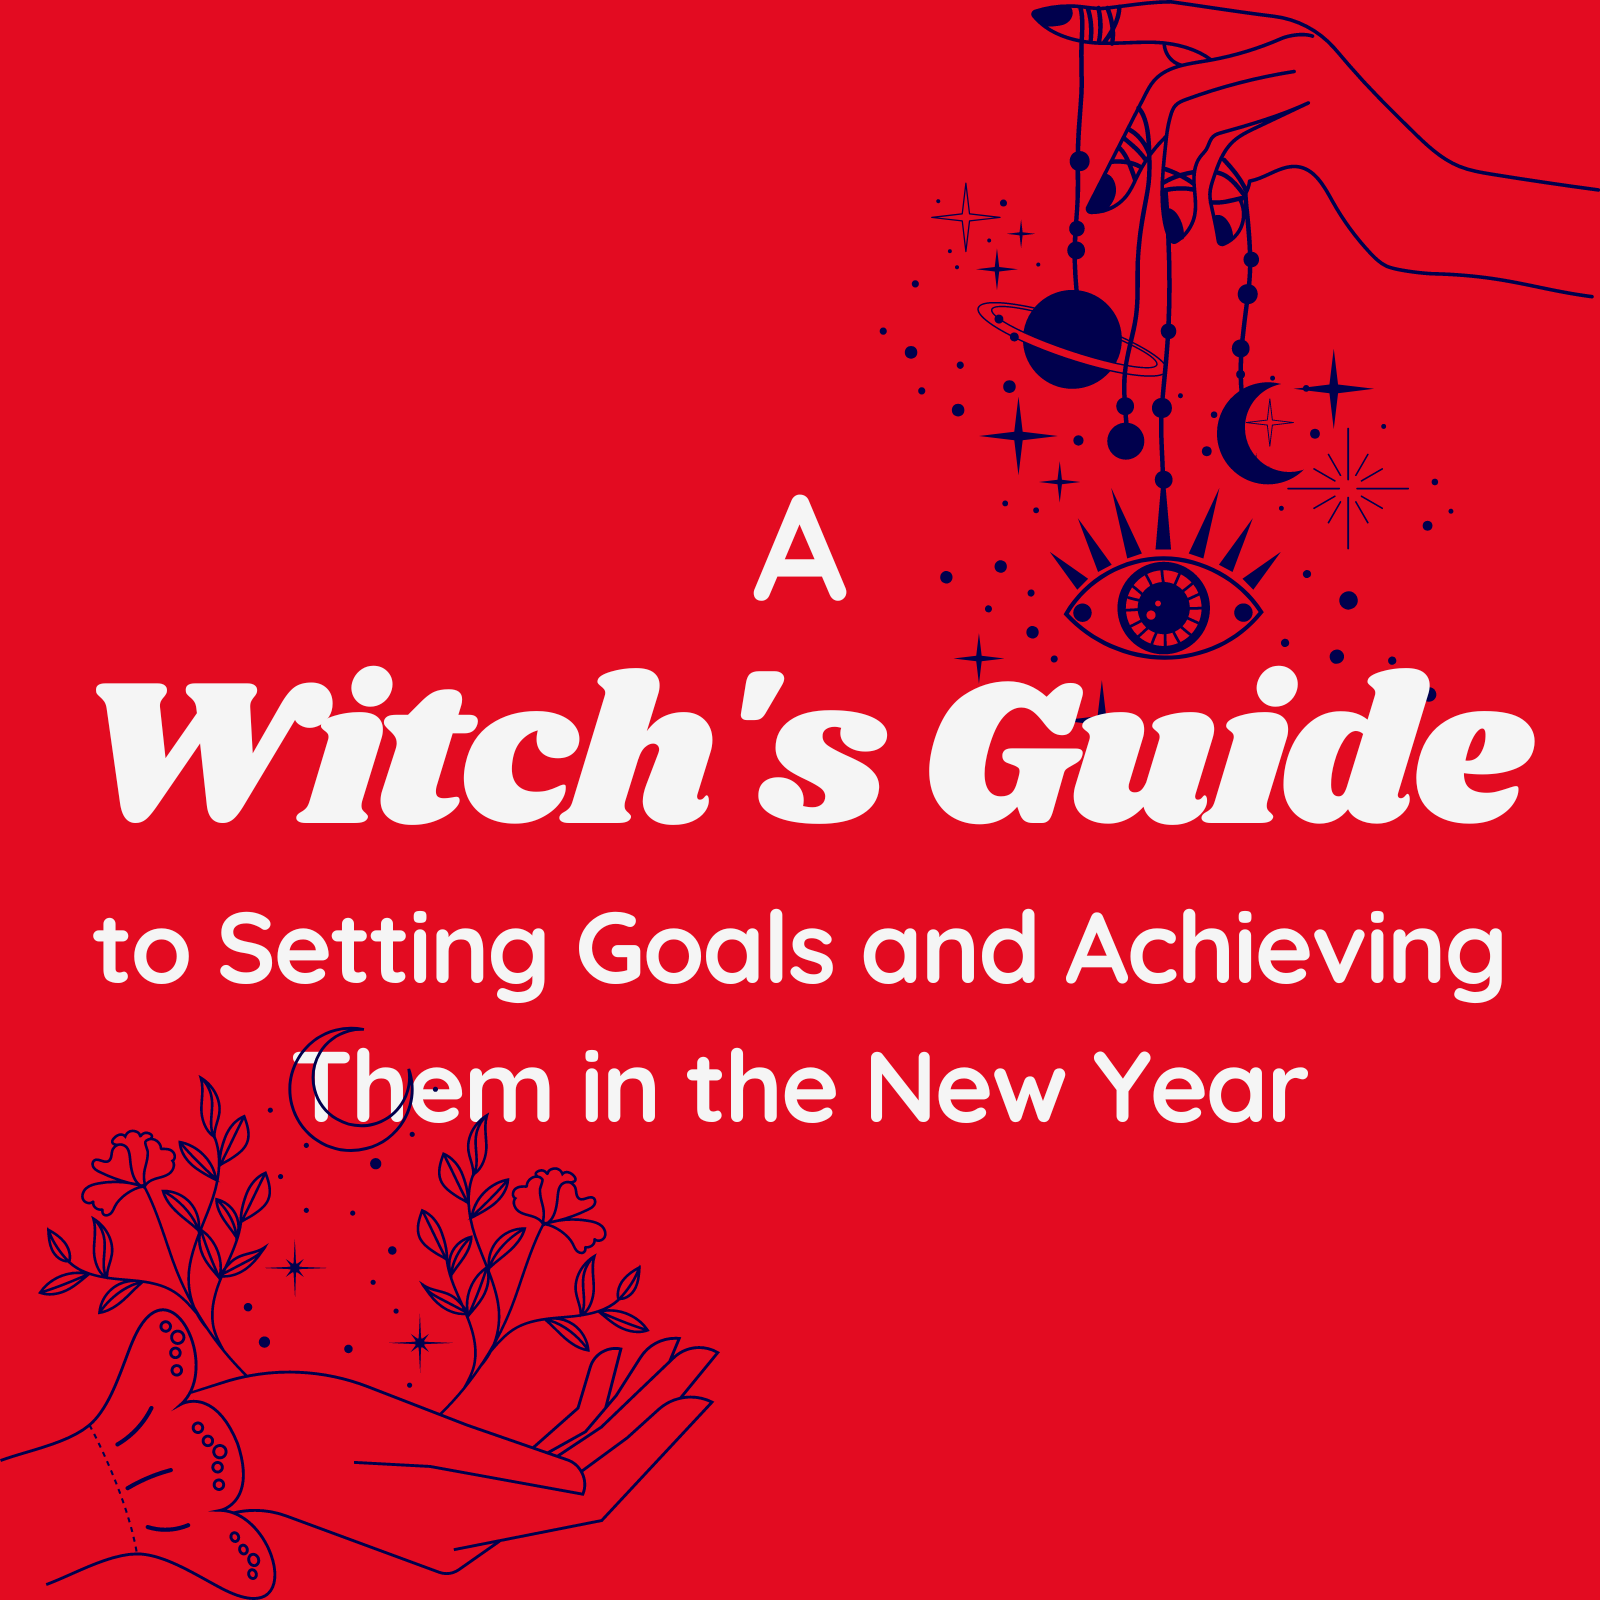 A Witch's Guide to Setting Goals and Achieving Them in the New Year